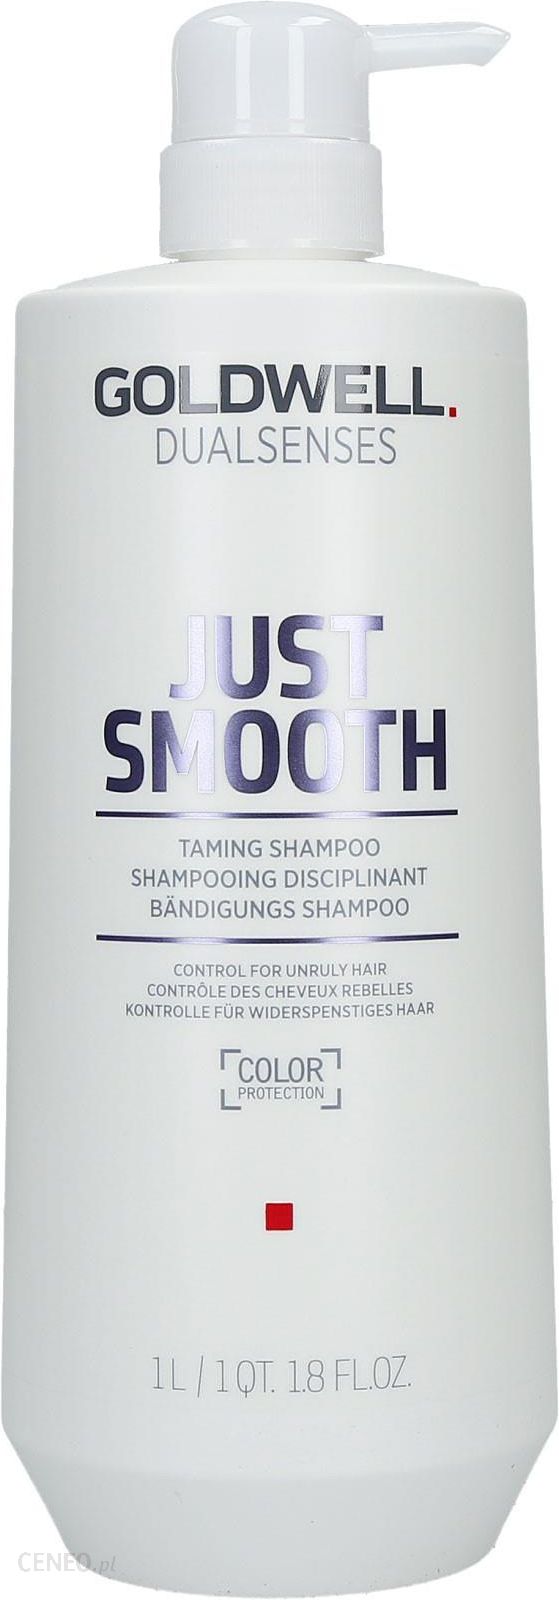 goldwell szampon just smooth opinie